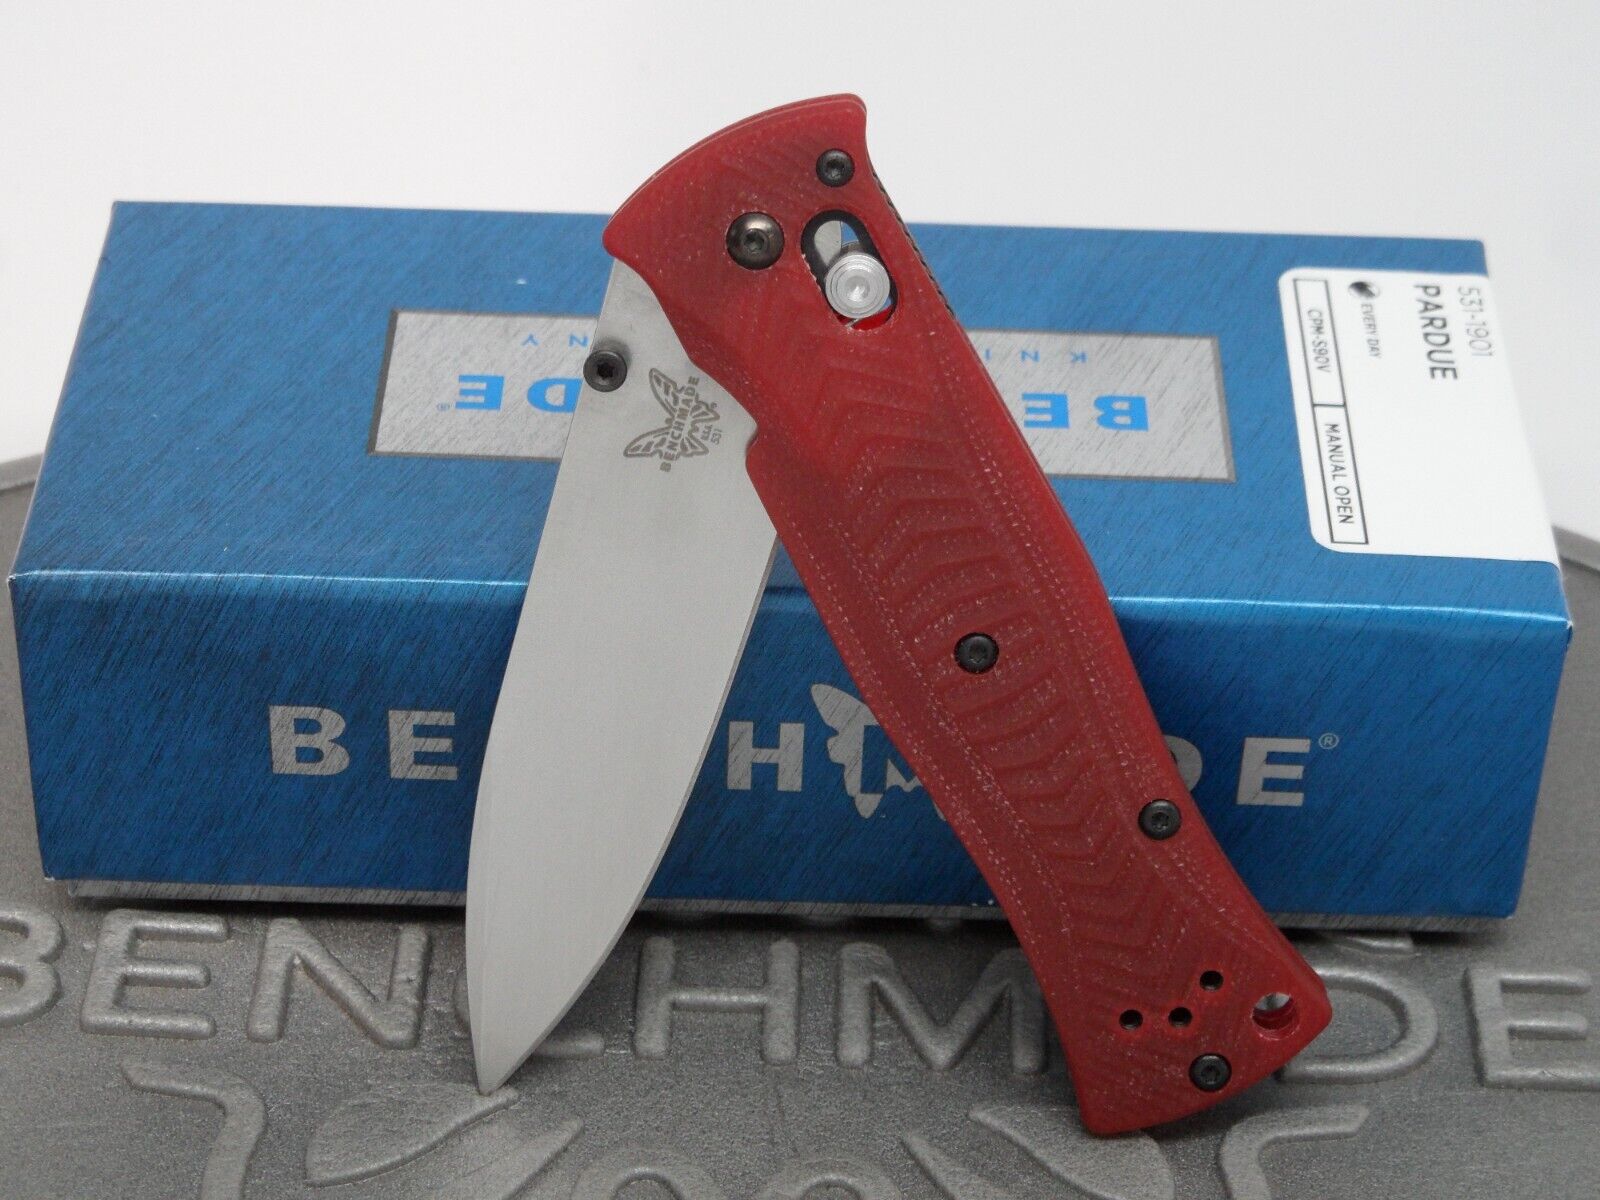 Benchmade 531-1901 Pardue Axis Red G10 S90V Limited Edition Folding Knife